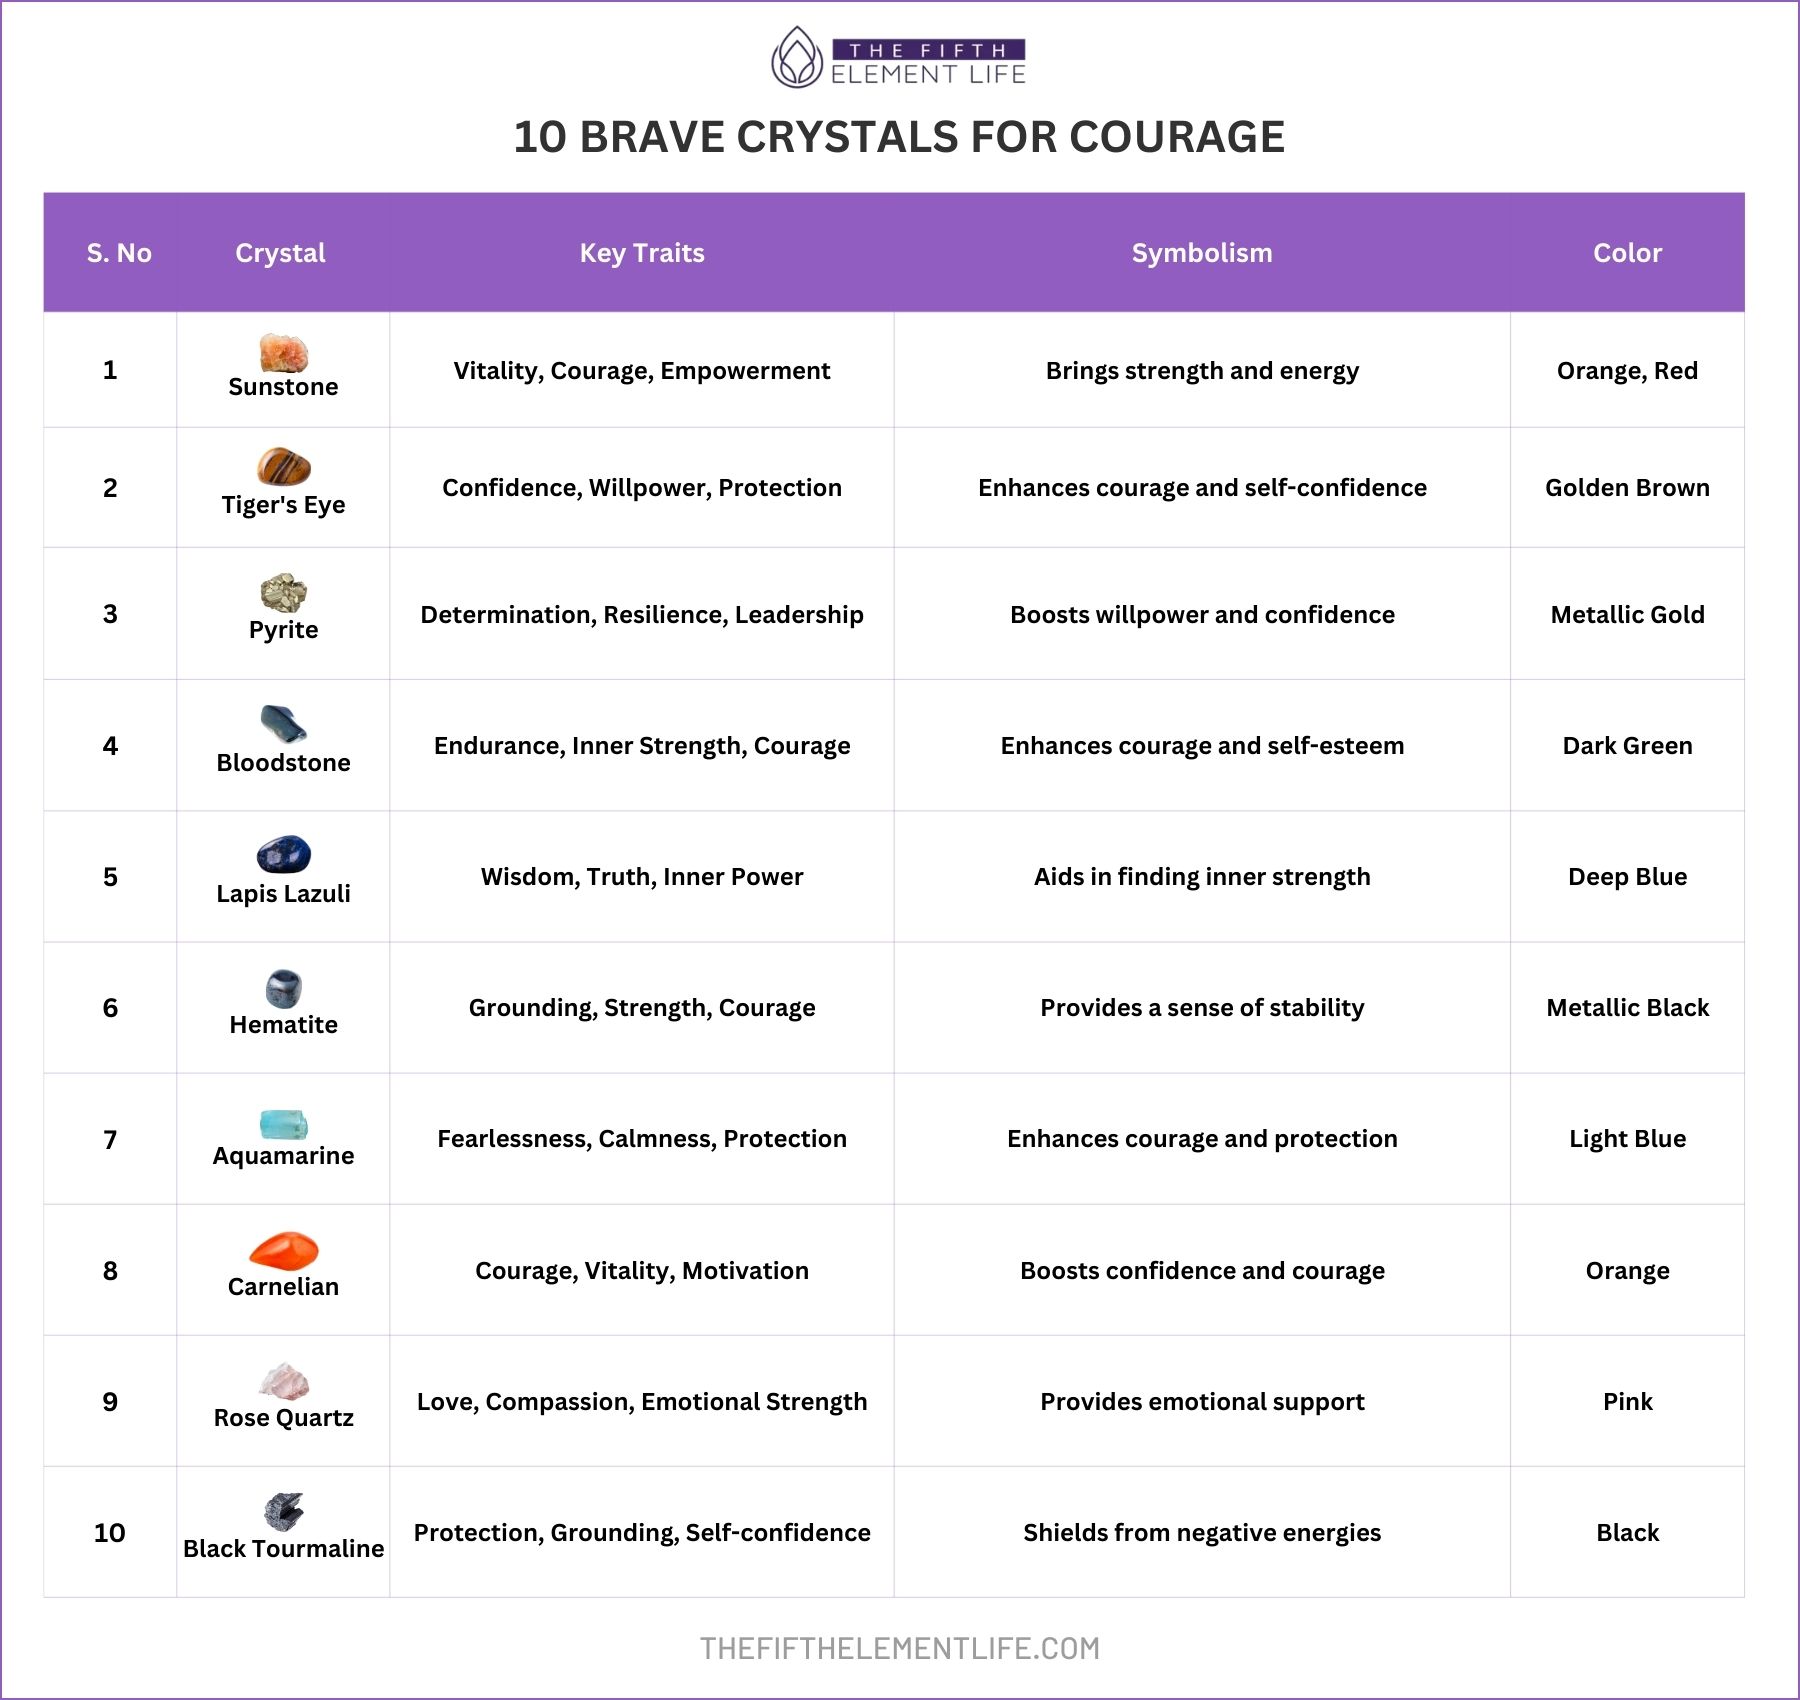 10 Brave Crystals For Courage